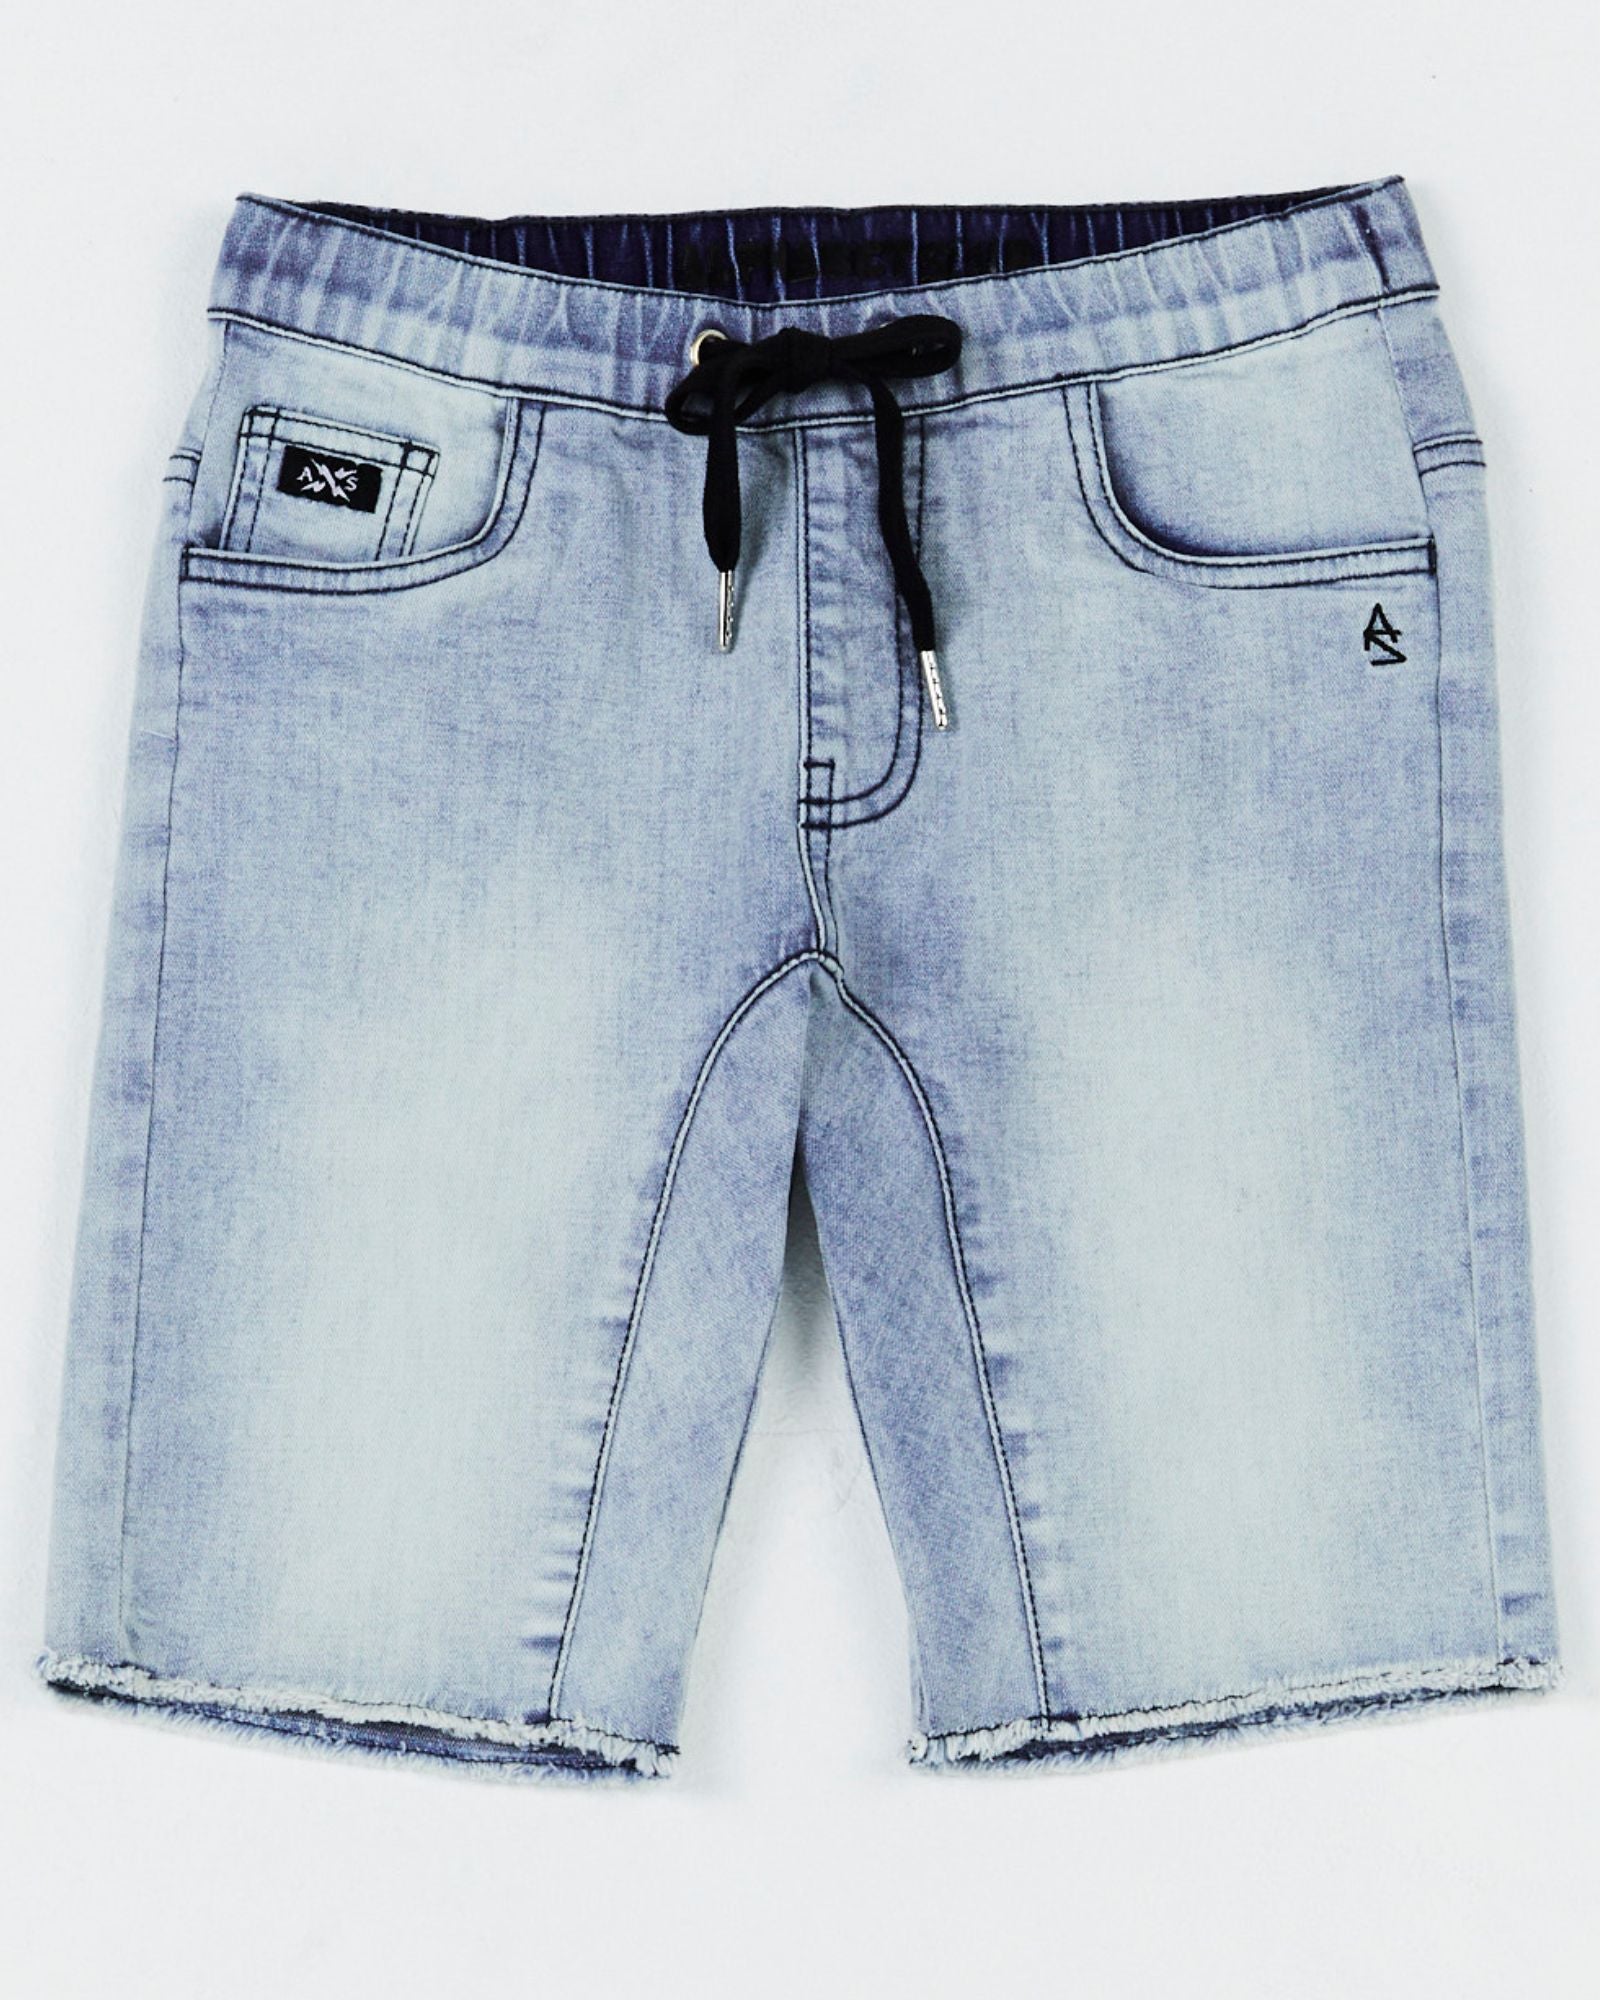 Alphabet Soup's Kids Chopper Jogg Jean Short for boys aged 2-7. Featuring super comfy stretch light blue faded denim, elasticated waist, adjustable drawcords, faux fly and five pocket design.